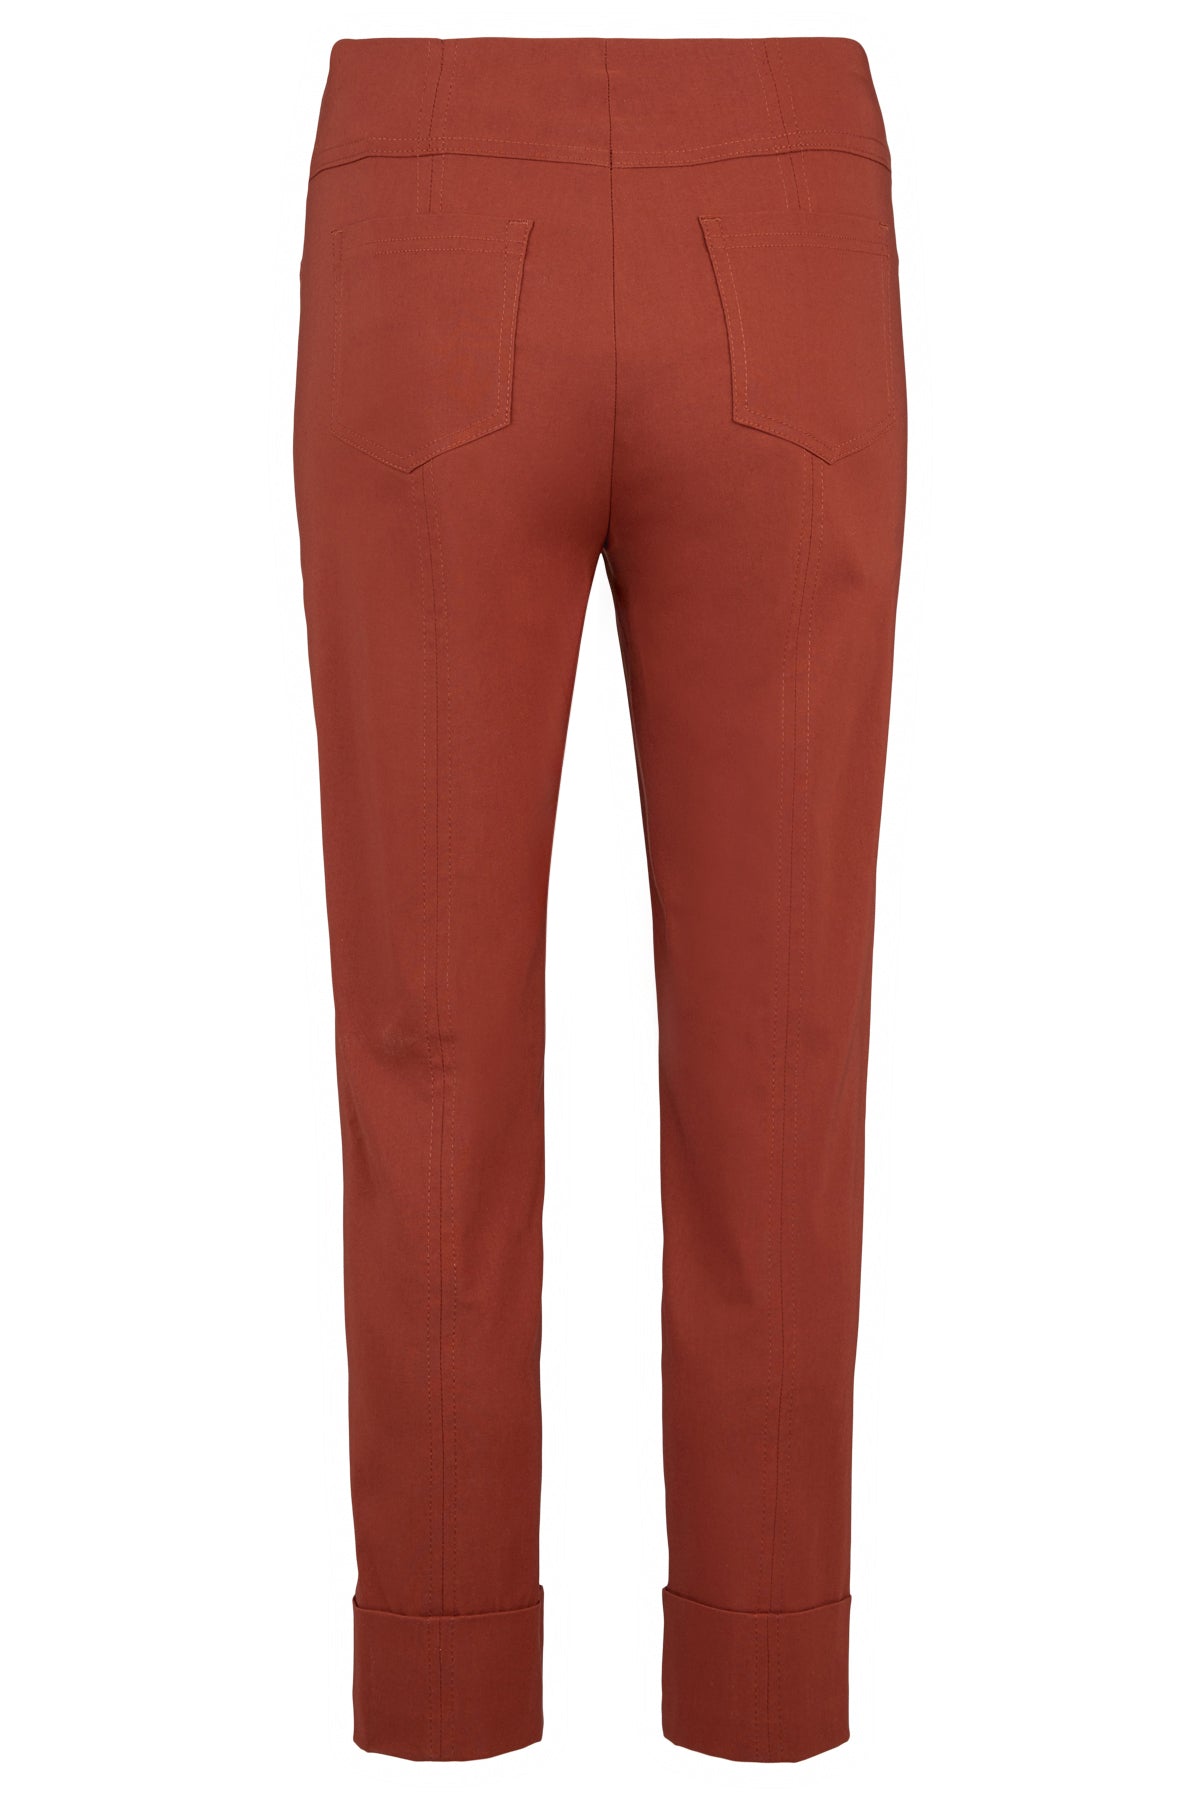 Robell 7/8ths Trousers in Rust